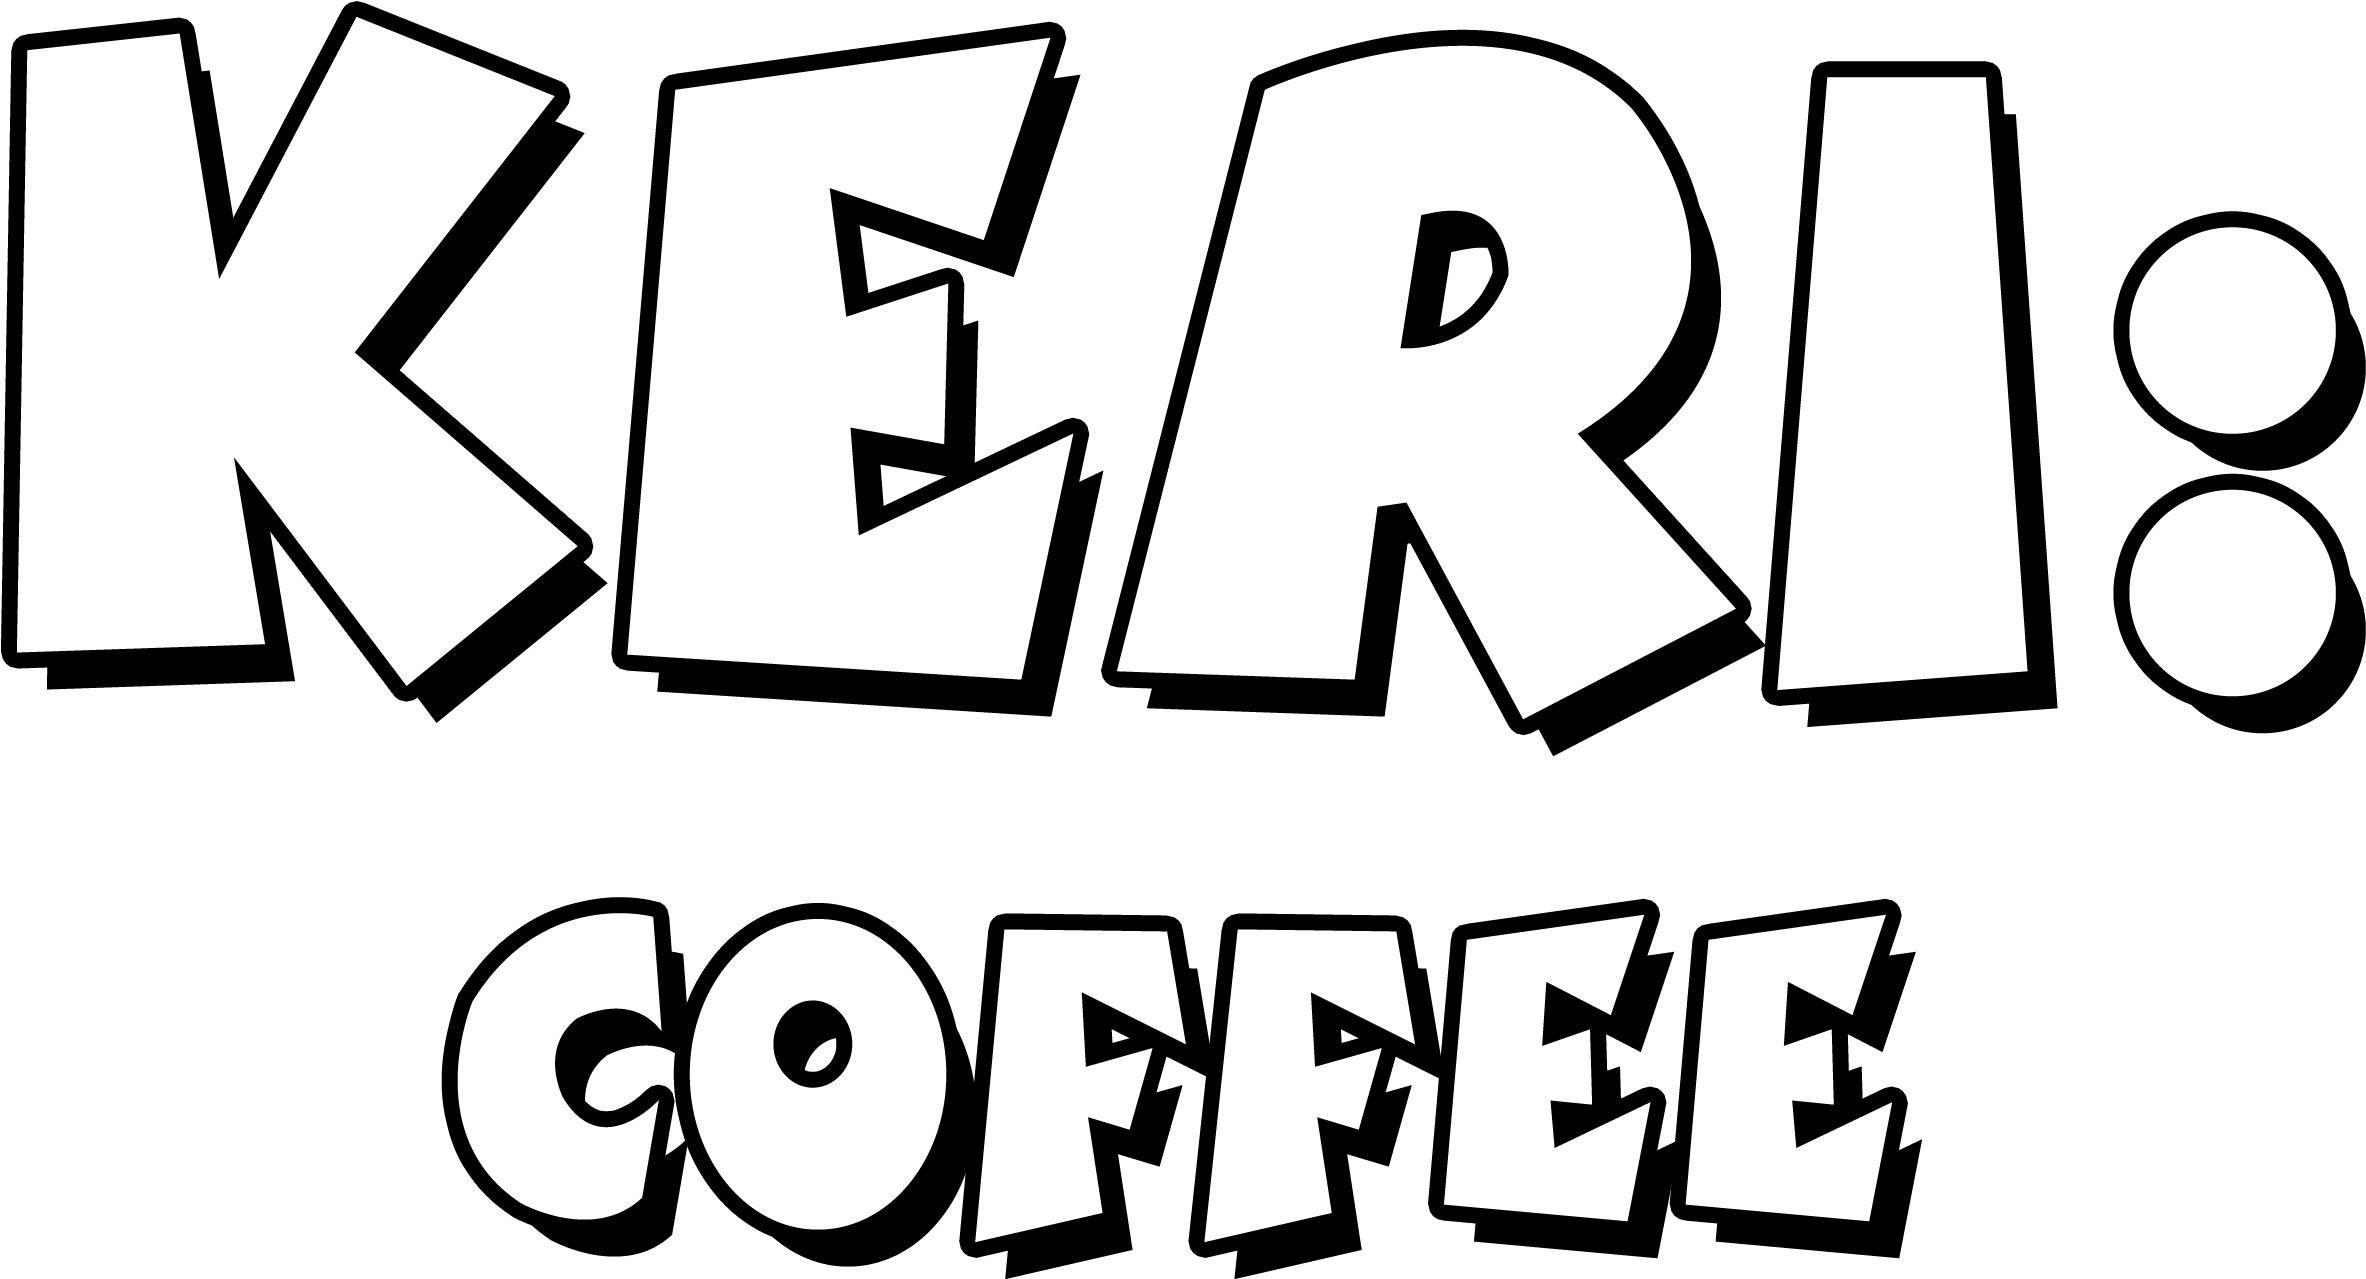 Coffee Is The Seventh And Final Book In The Keri Series - Coffee Is The Seventh And Final Book In The Keri Series (2500x1400)